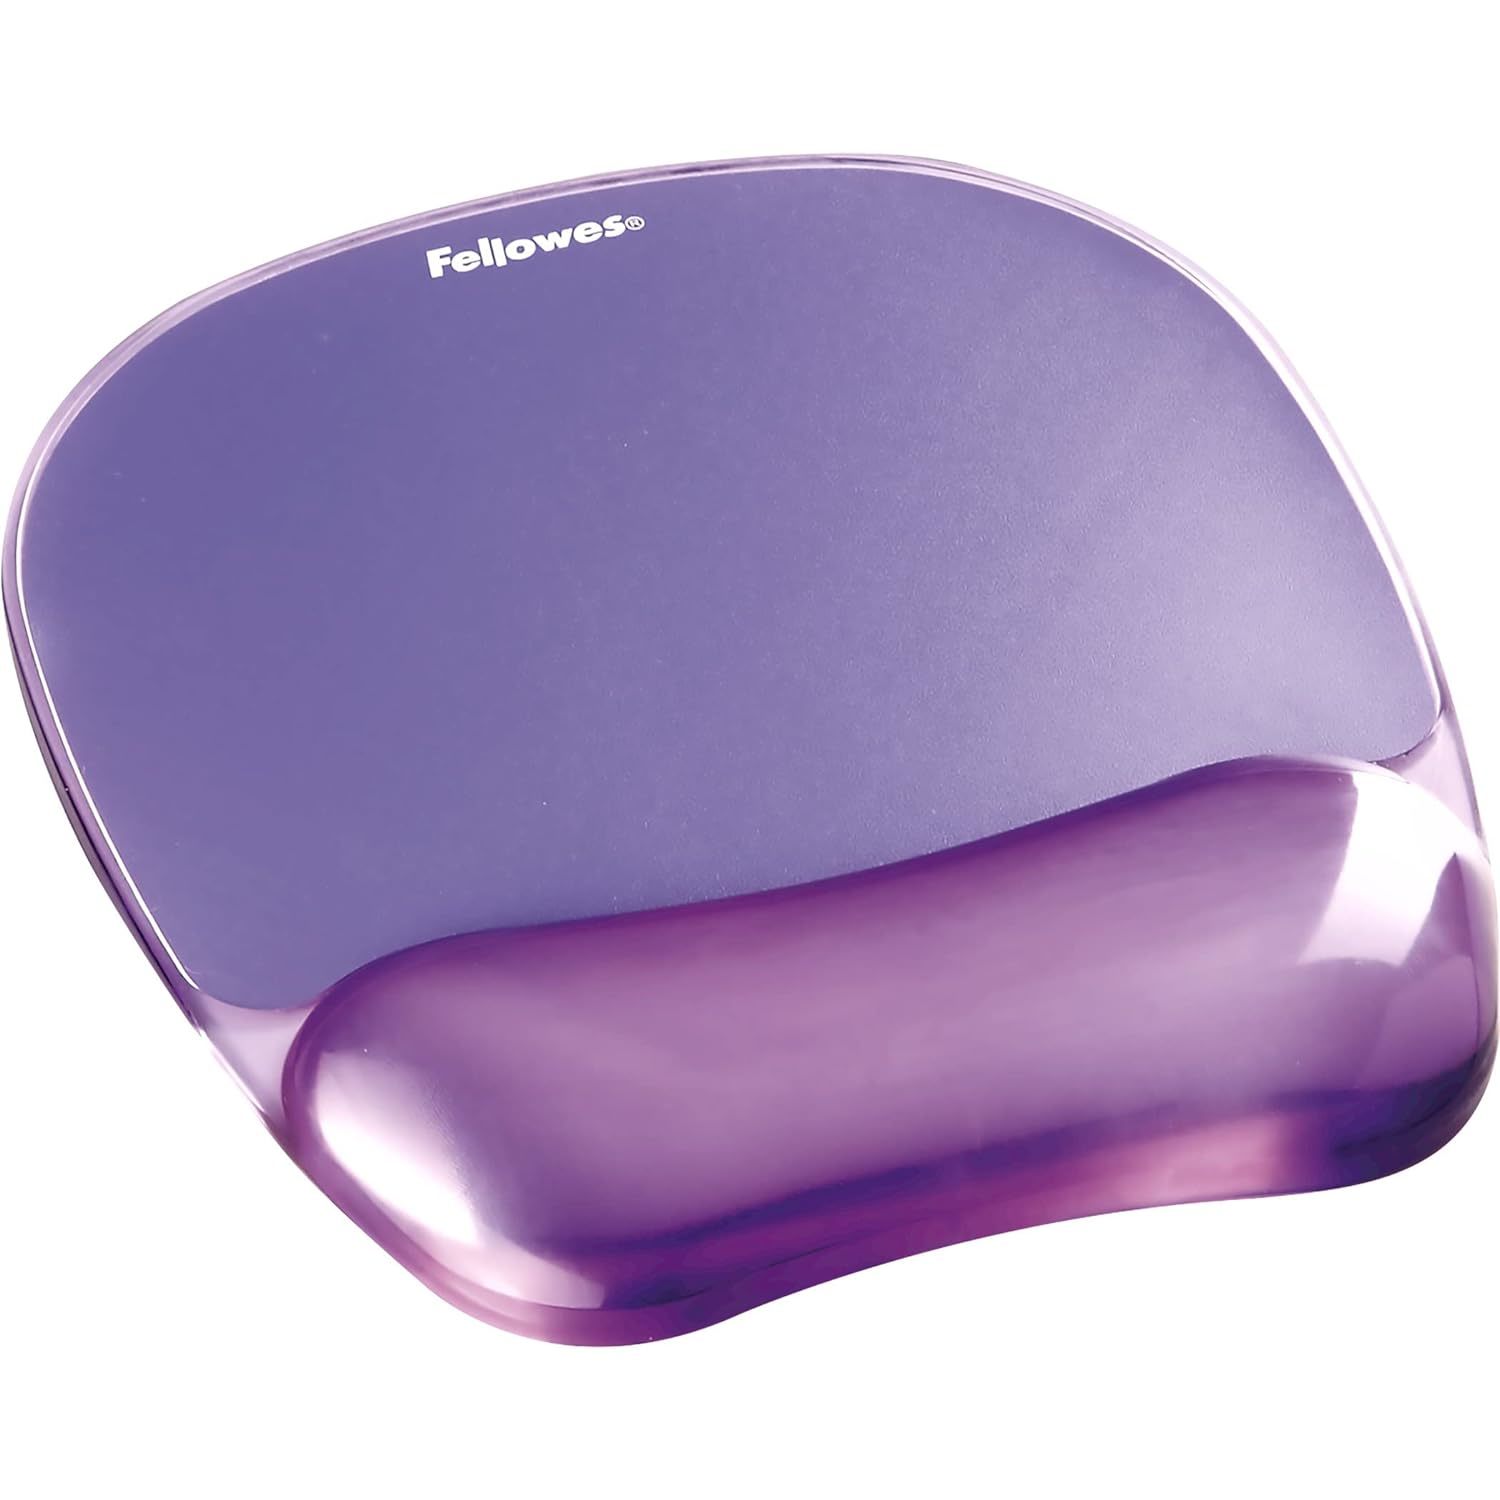 Primary image for Fellowes Gel Crystal Transparent Mousepad and Wrist Rest - Purple, 9.05" x 7.95"